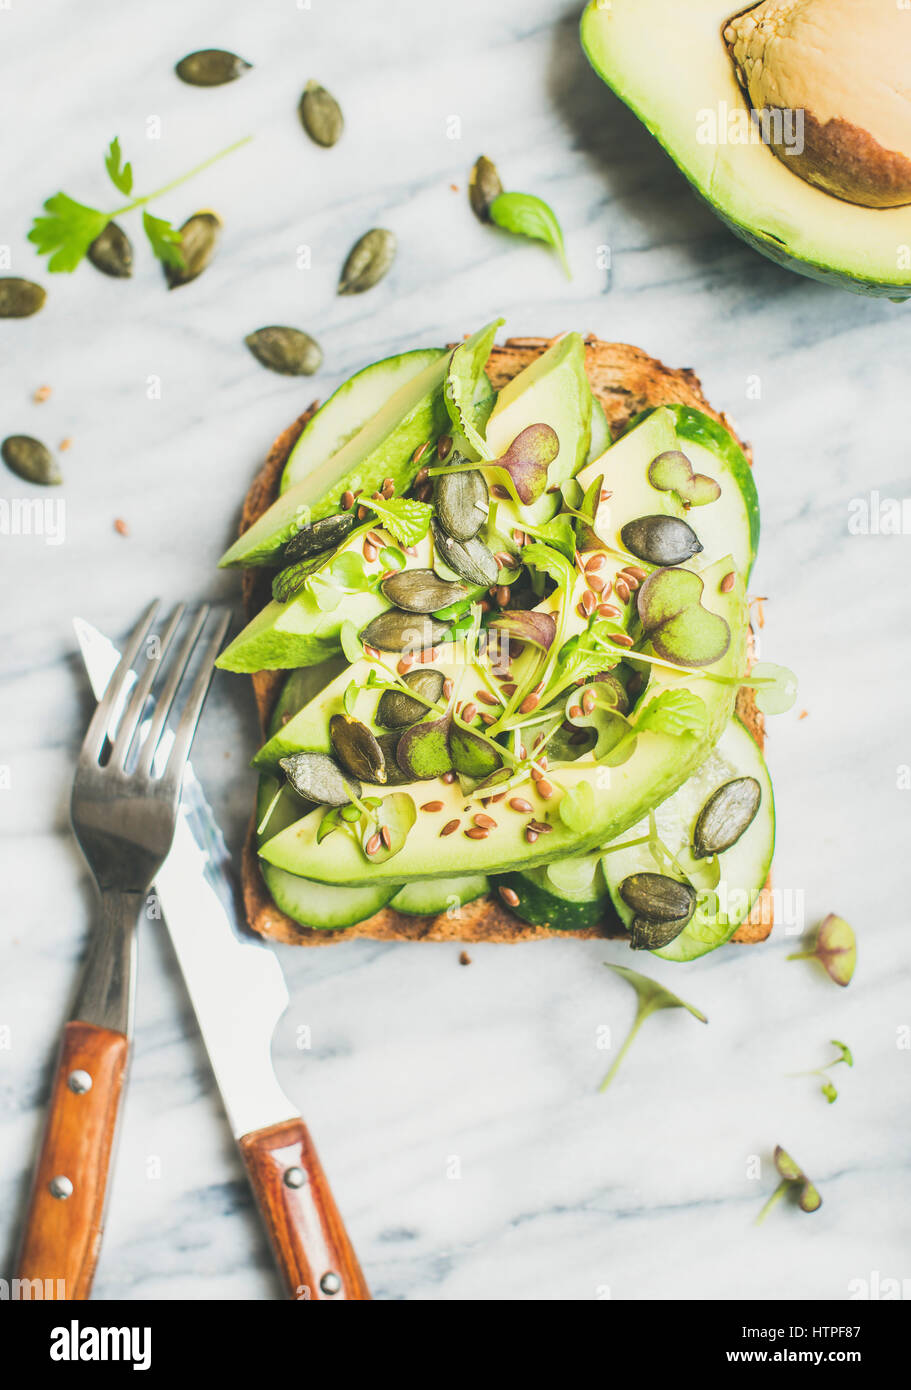 Healthy green veggie breakfast concept. Sandwich with avocado, cucumber, kale, kress sprouts, pumpkin seeds over marble background, top view. Vegan, w Stock Photo